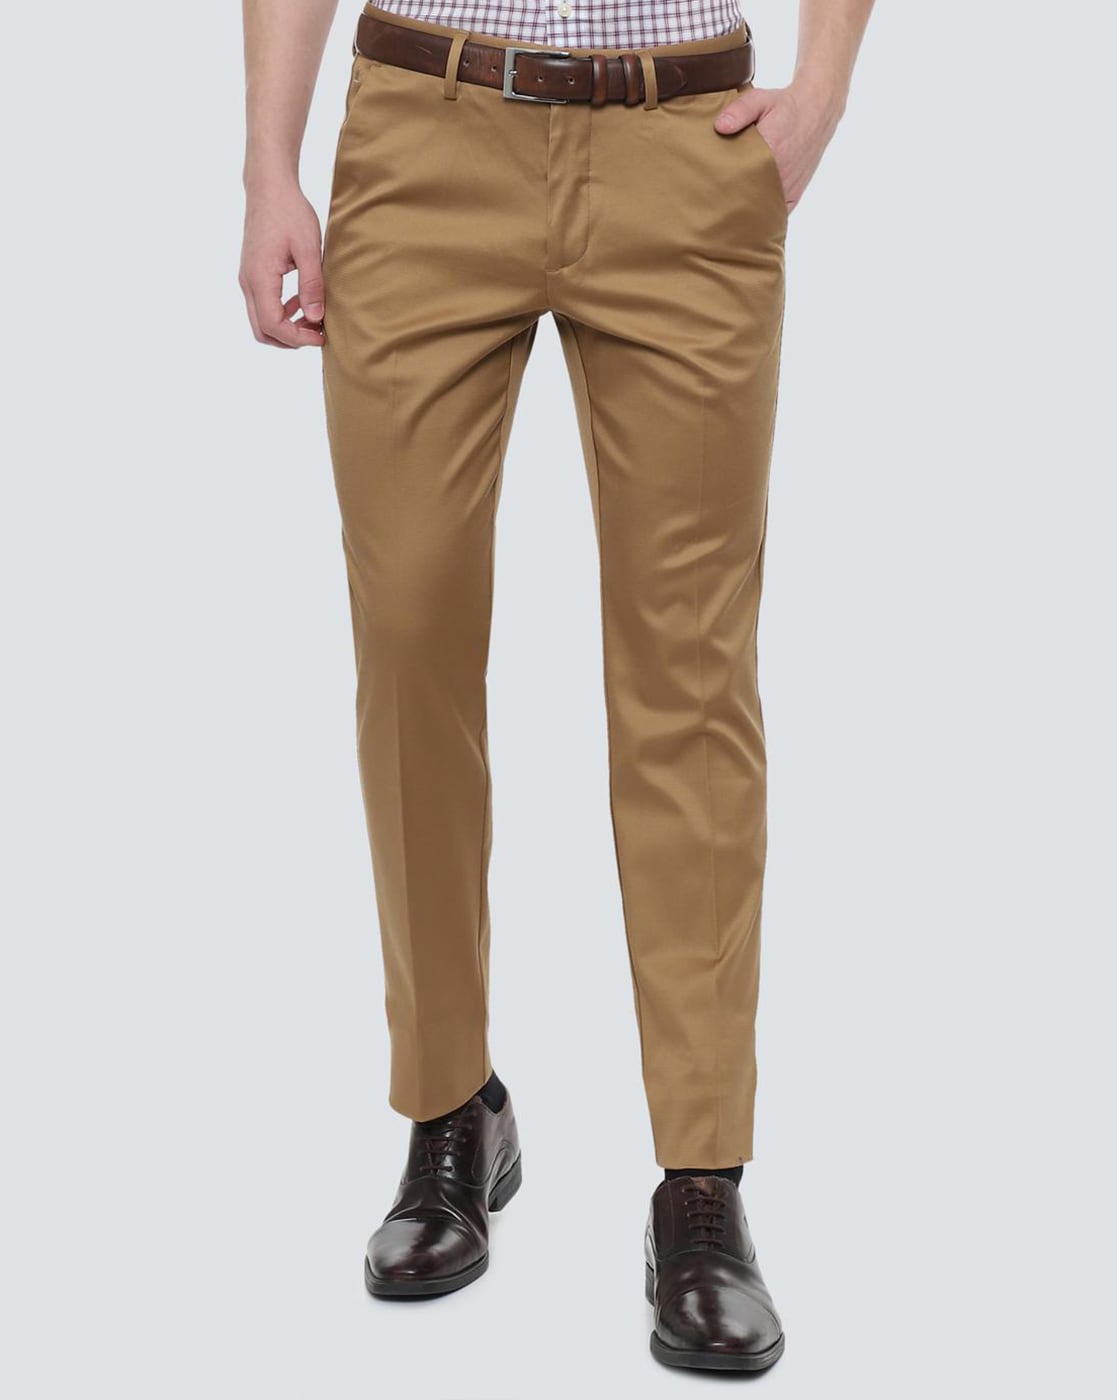 Peter England Formal Trousers  Buy Peter England Grey Trouser Online   Nykaa Fashion